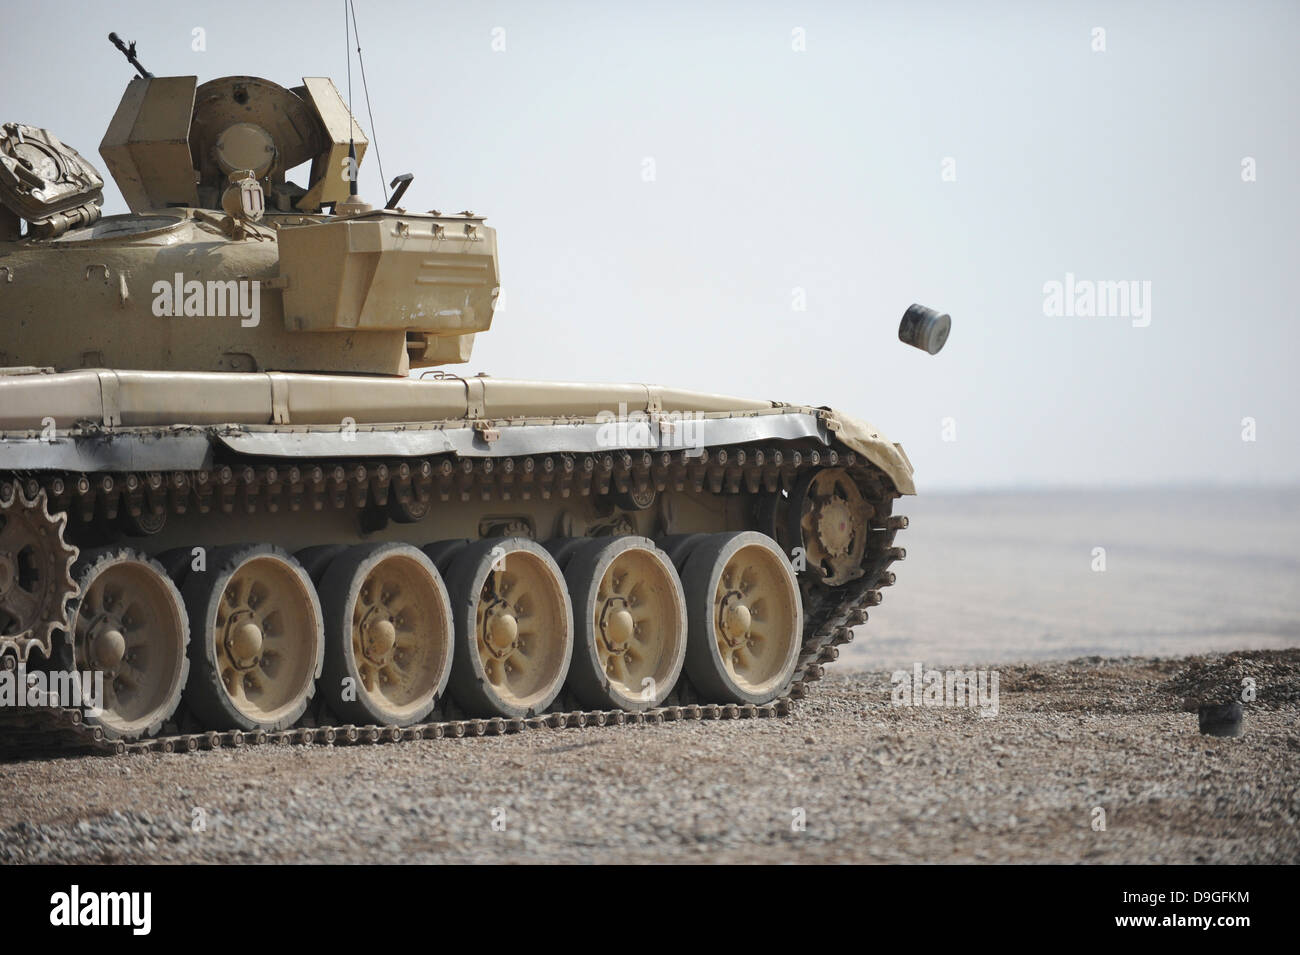 Empty casings eject from an Iraqi T-72 tank on the firing range. Stock Photo